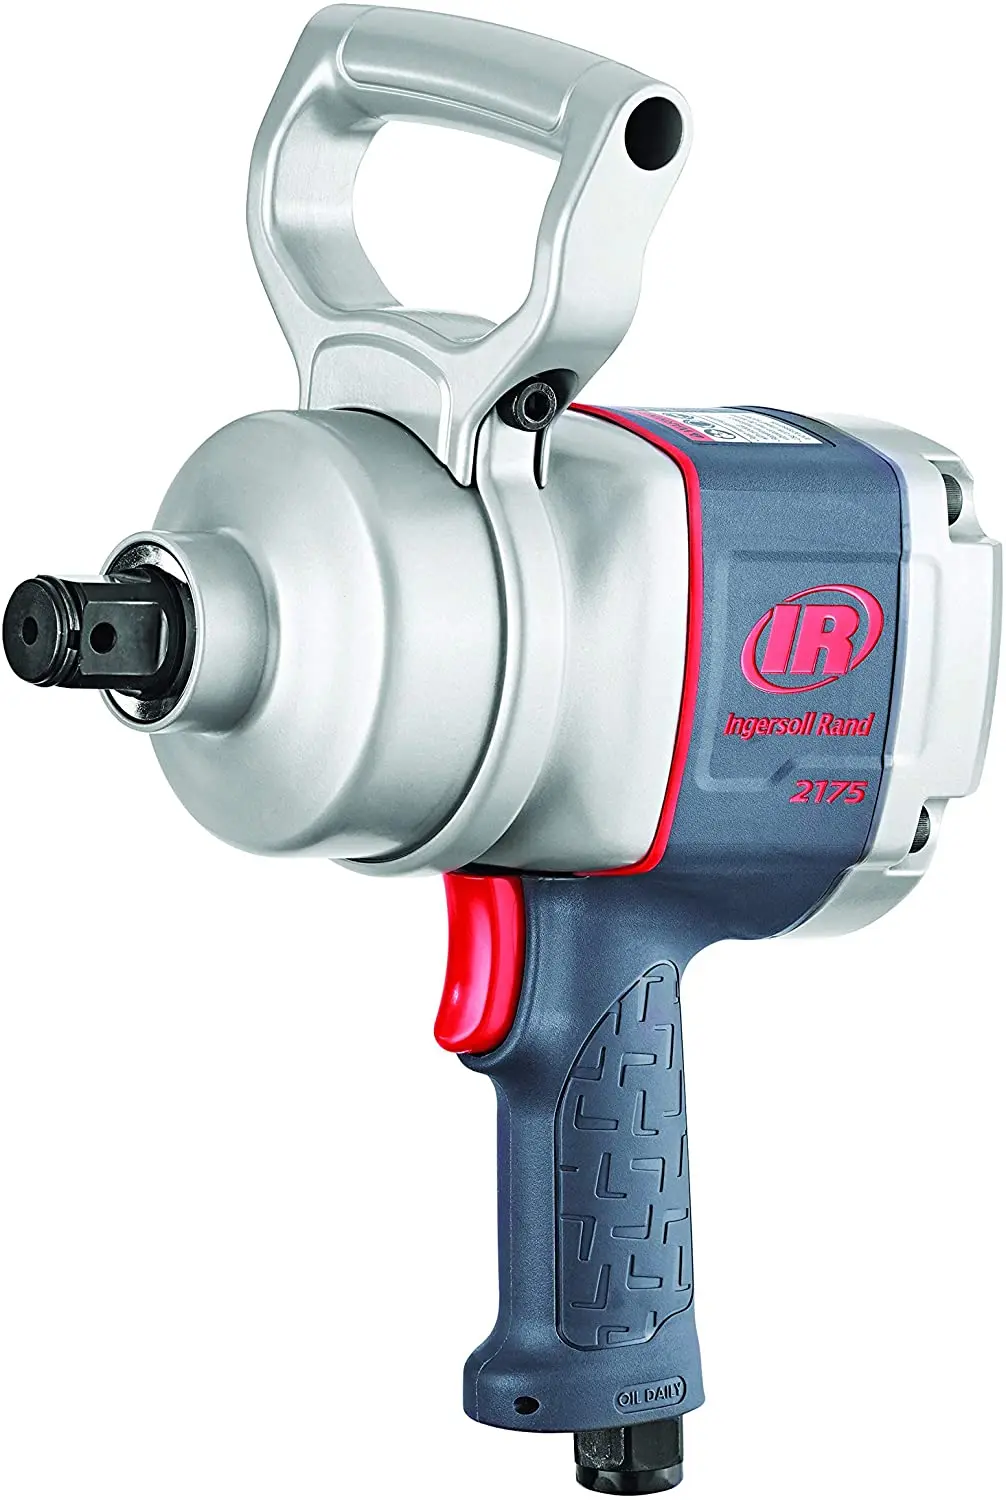 

Inger soll Rand 2175MAX 1 inch Pistol Grip Impact Wrench, Air Powered, Up to 2000 ft lbs Reverse Torque Output, Lightweight,